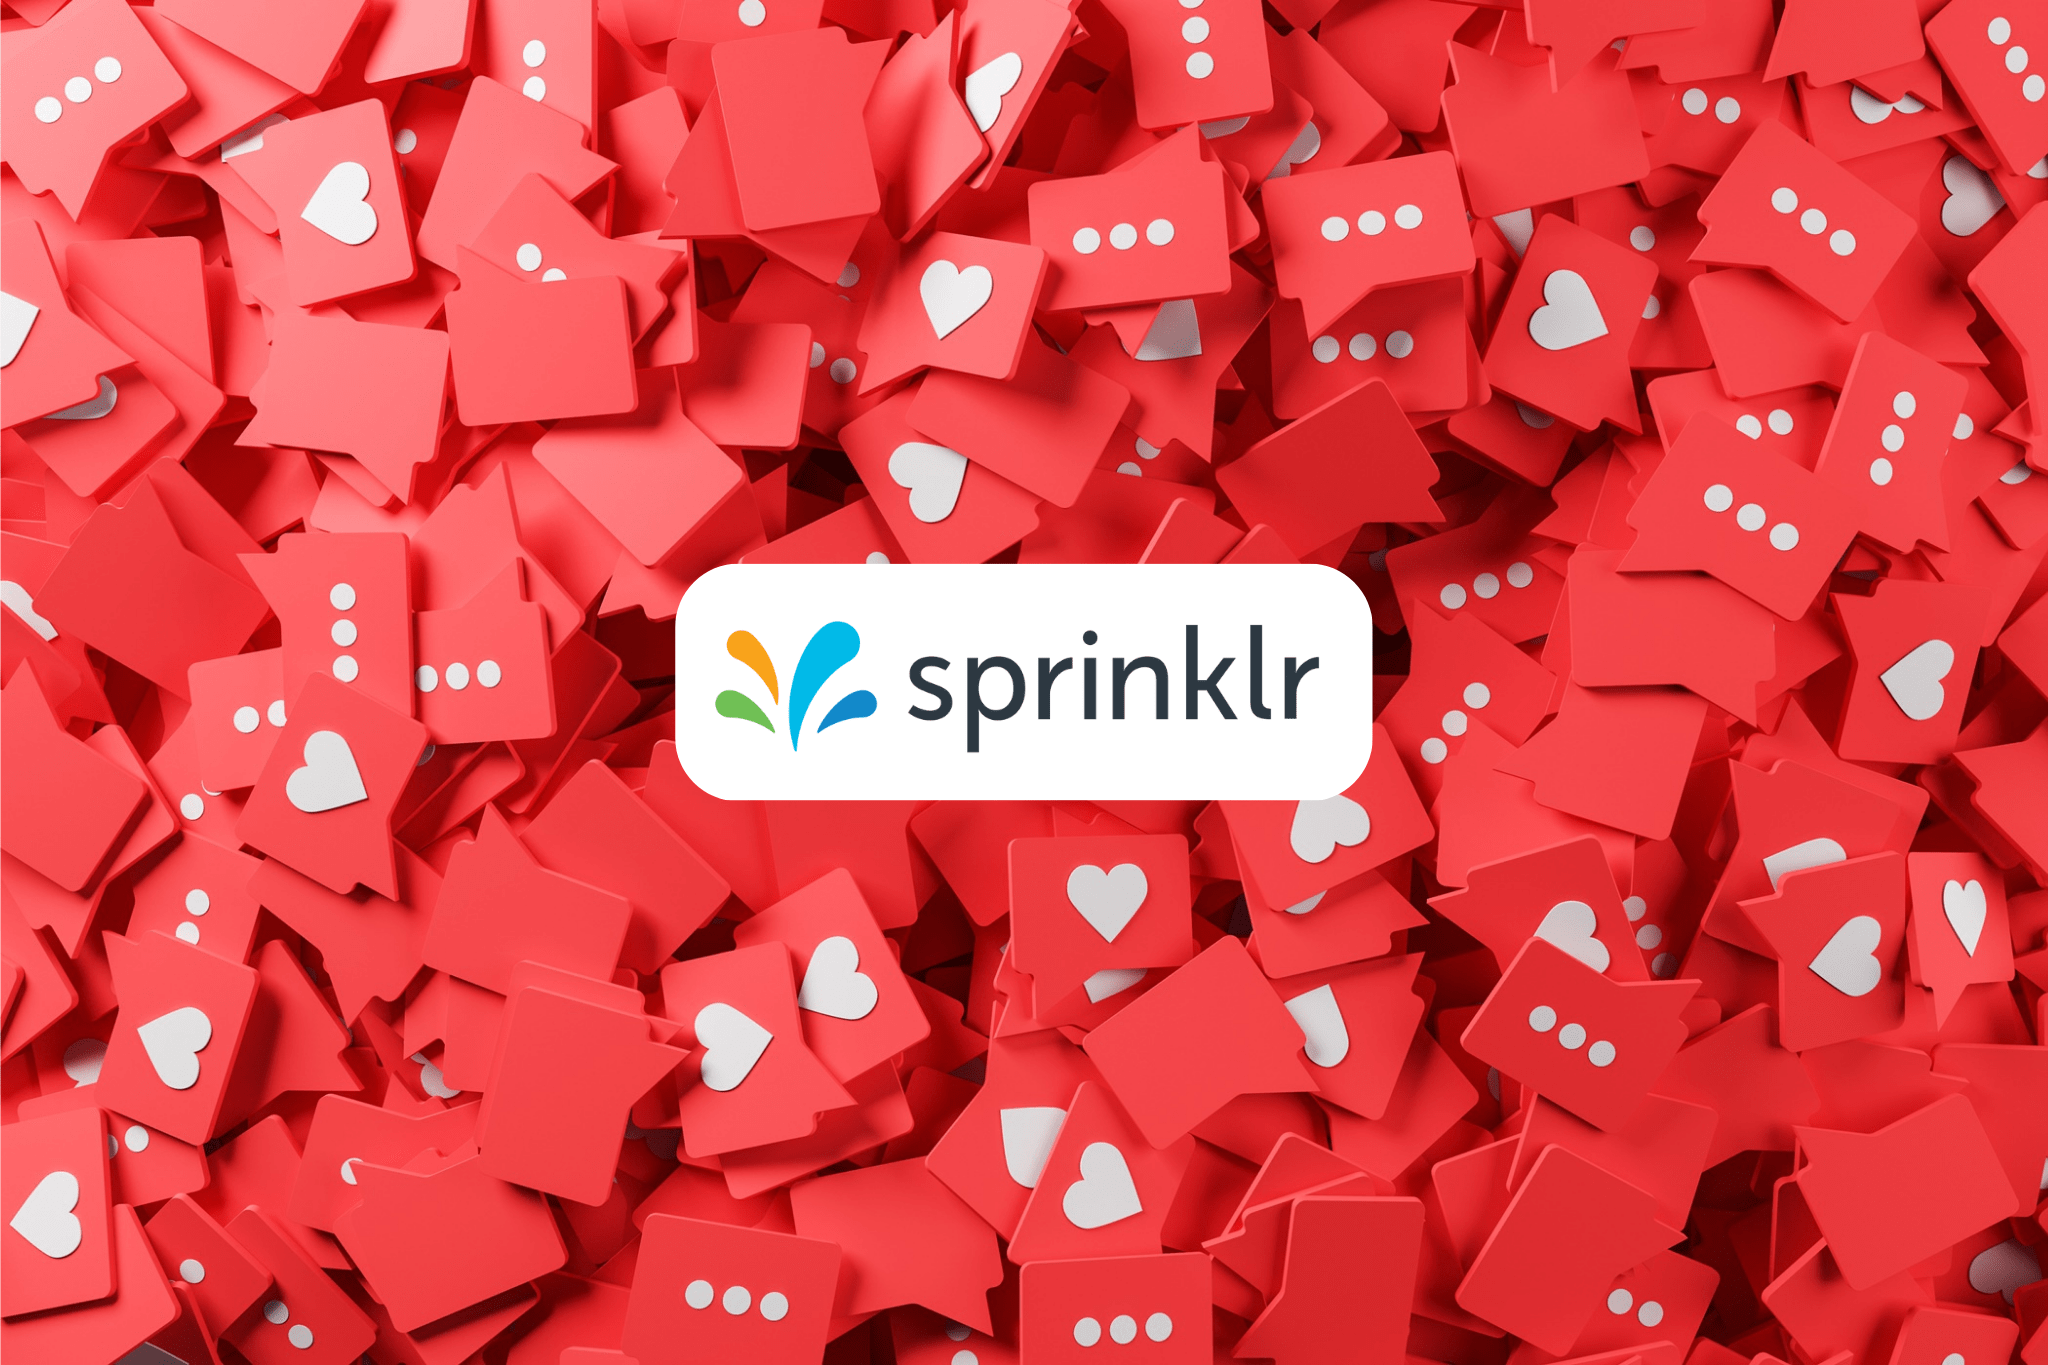 Sprinklr gives data to company that researches on anti-COVID vaccine;  controversy intensifies, Sprinklr, Pfizer, Sprinklr affiliation with  Pfizer, data leaking, date privacy, Kerala COVID issues